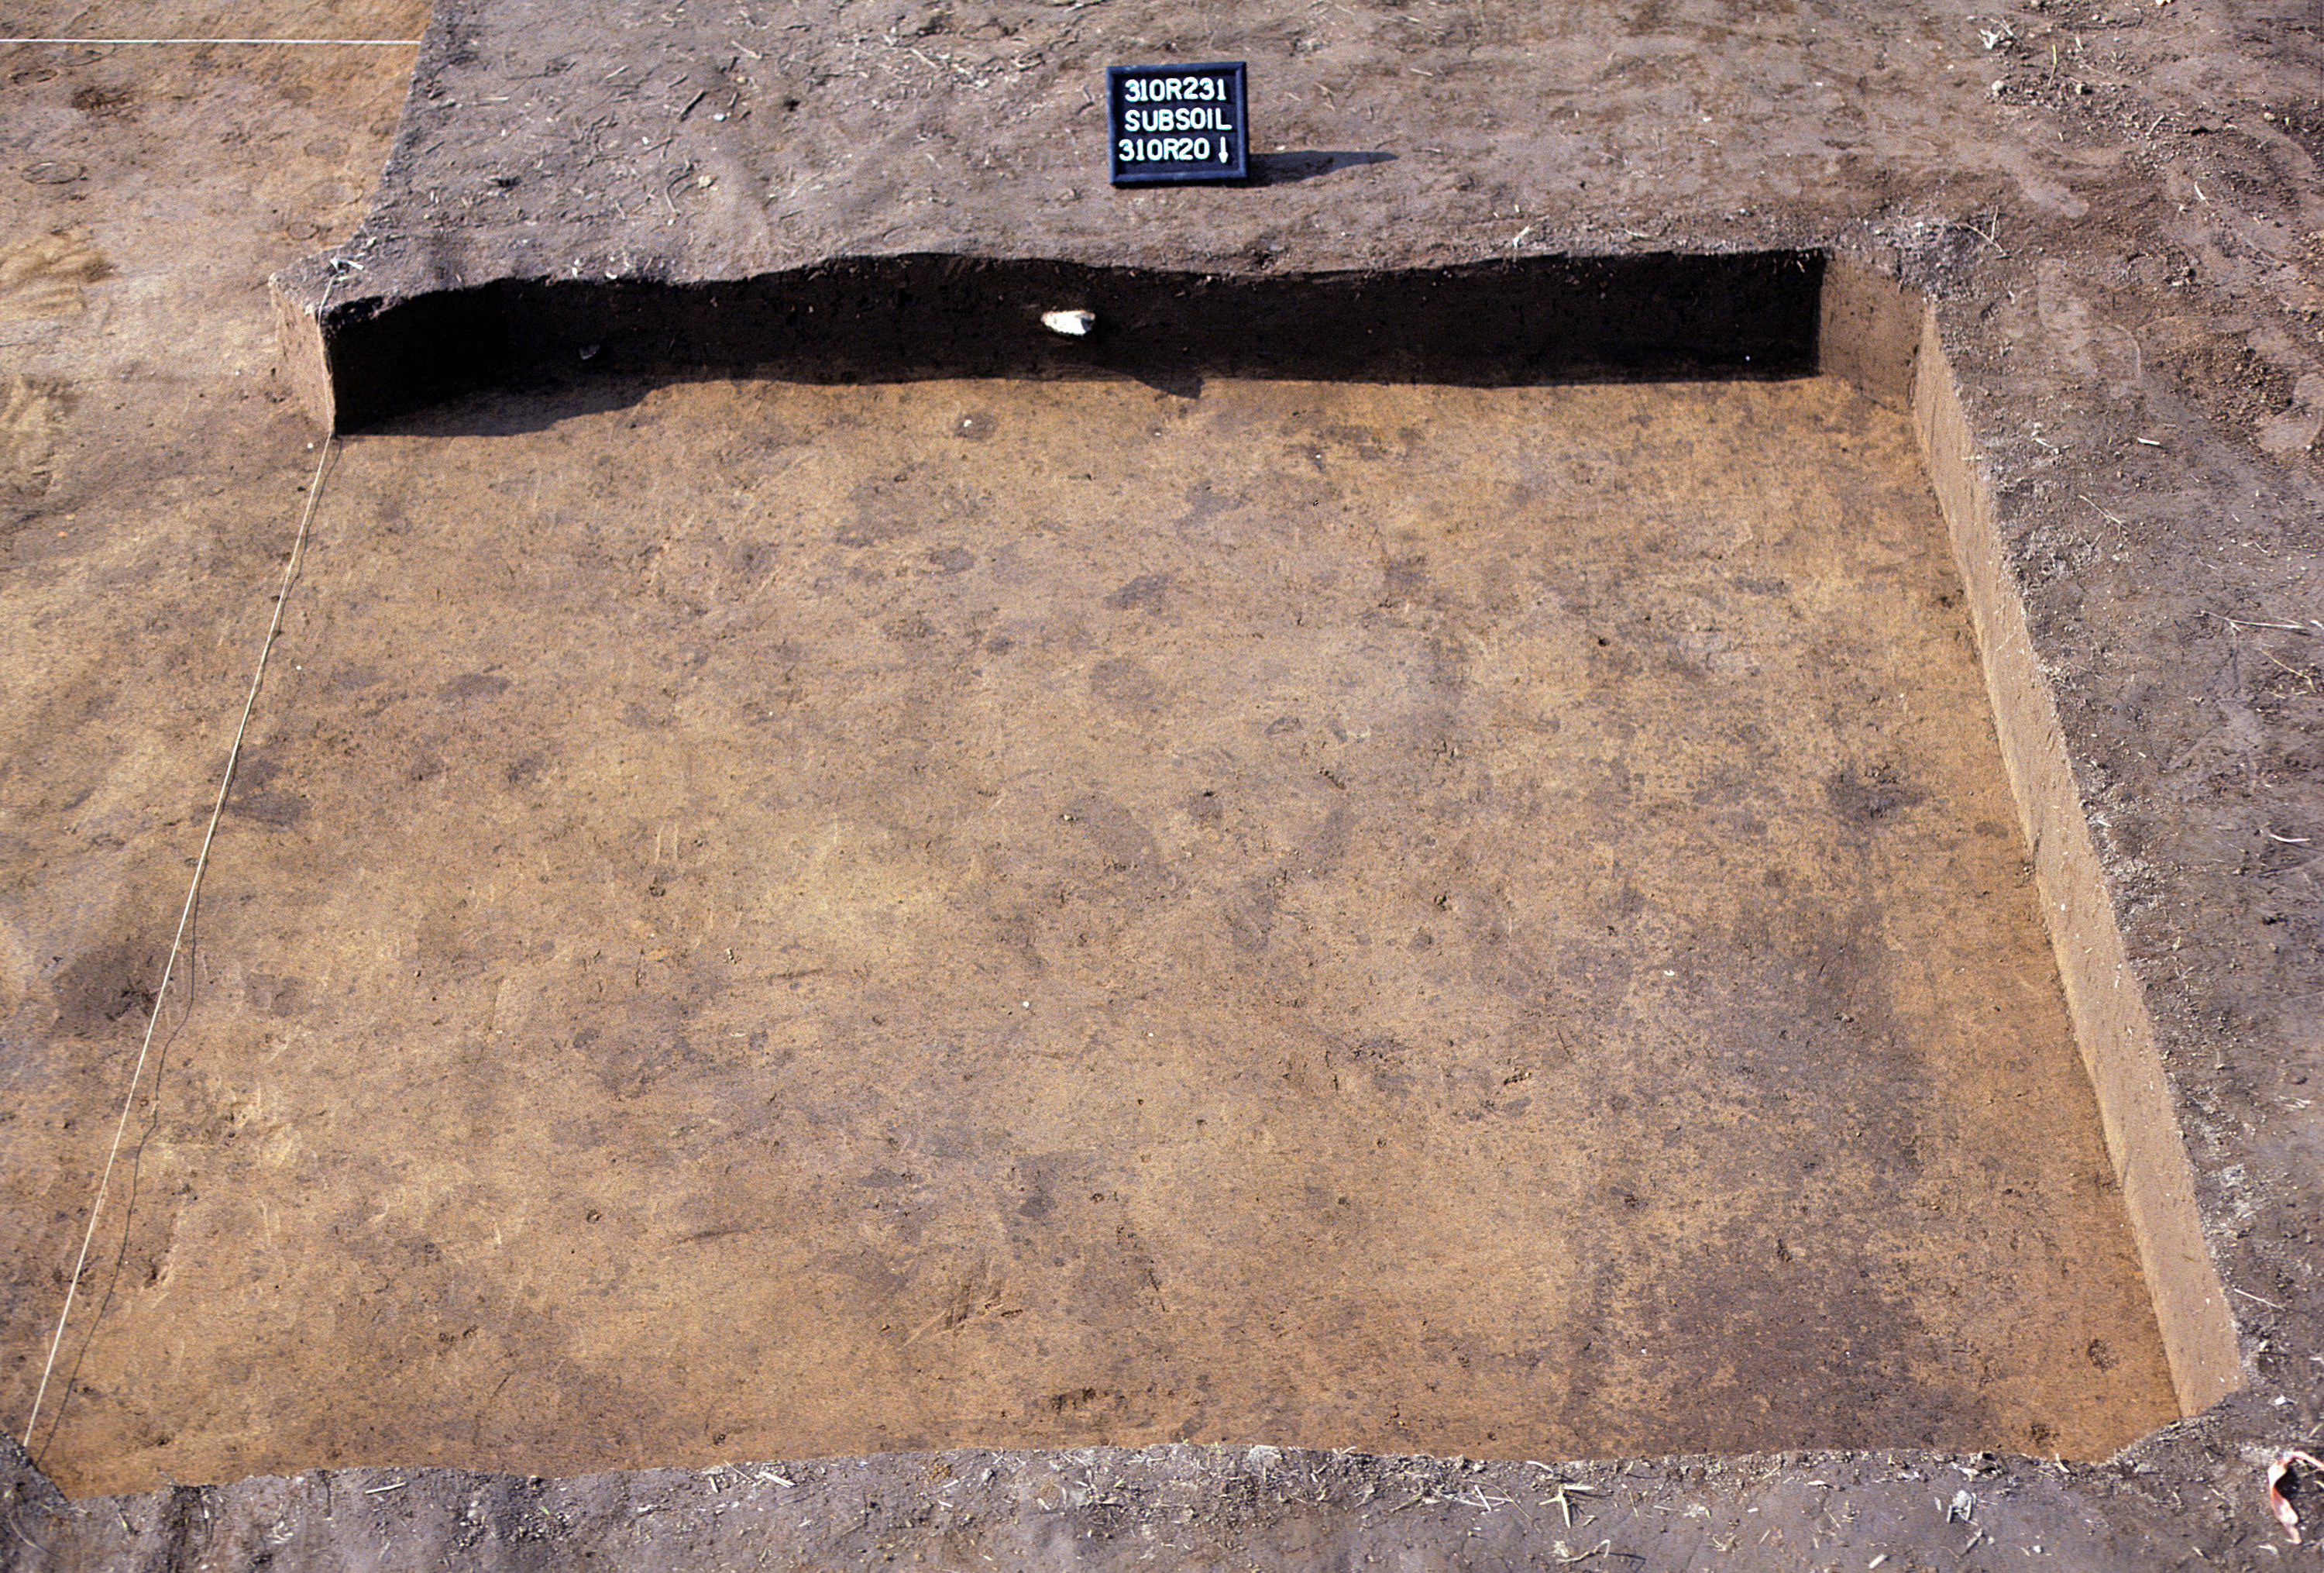 Figure 1013. Sq. 310R20 at top of subsoil (view to south).